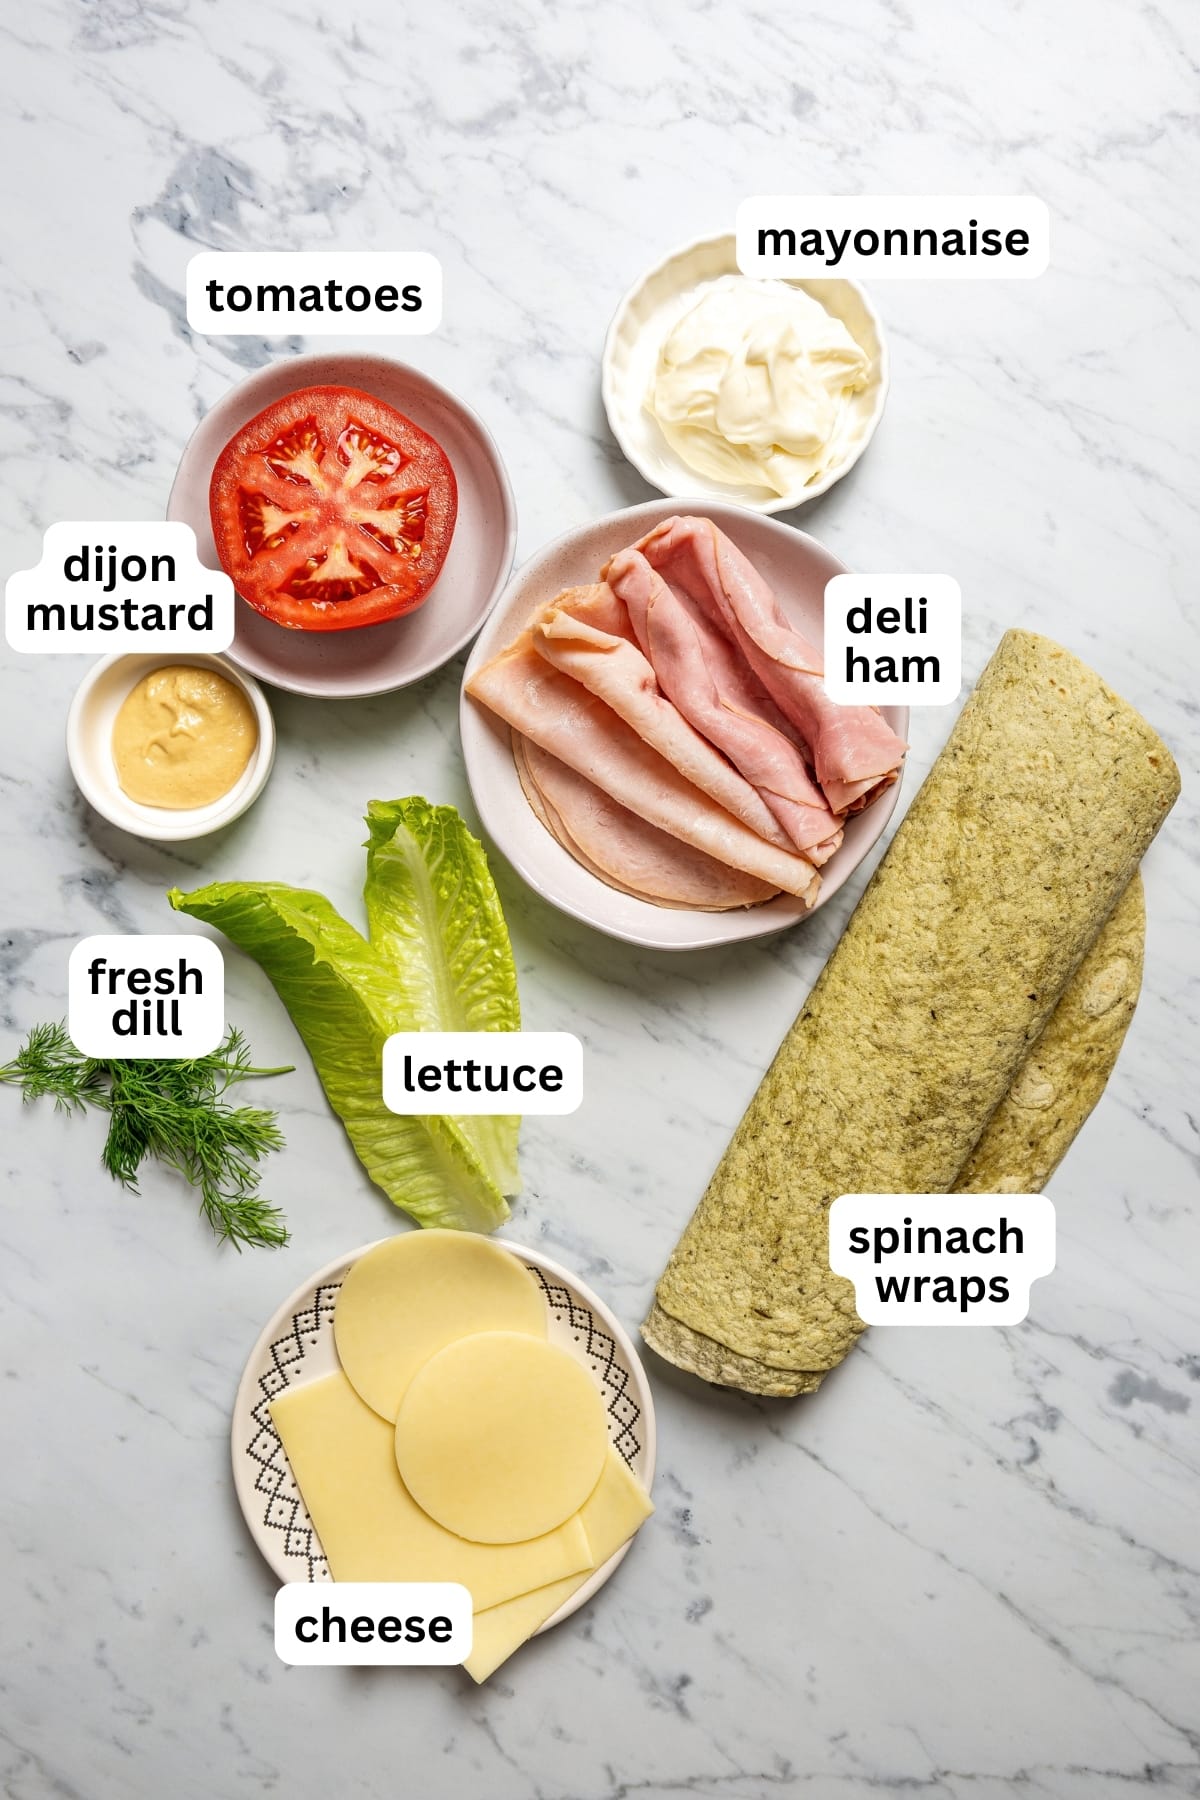 An image of all the ingredients for pinwheel sandwiches.